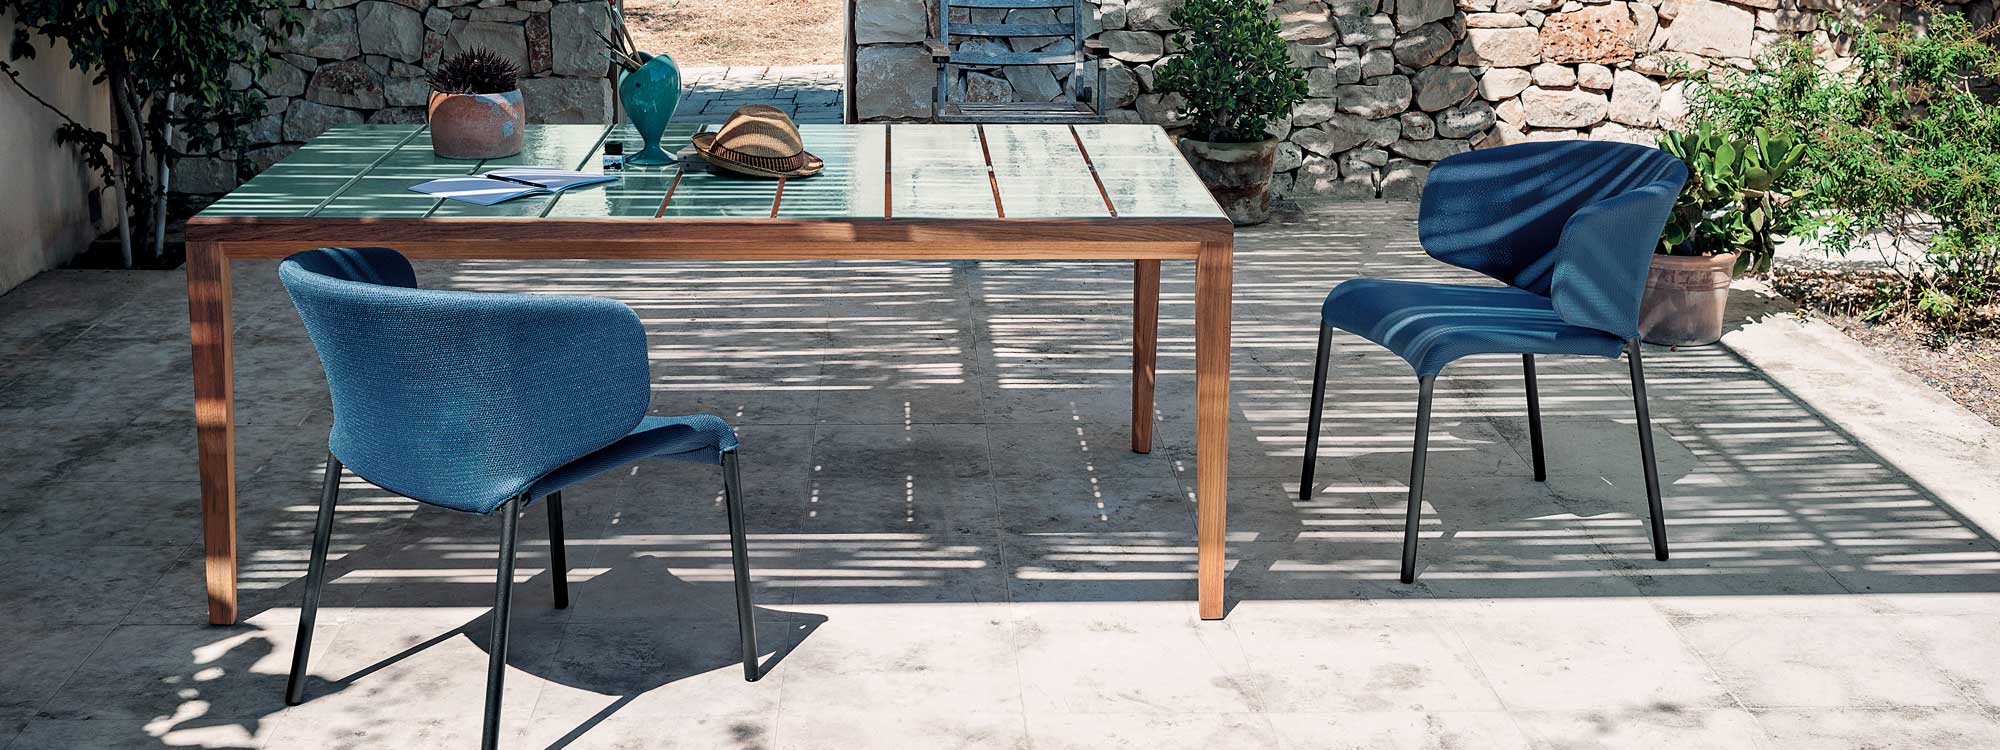 Teka teak table with gres stone top and Double garden chairs in Mediterranean courtyard